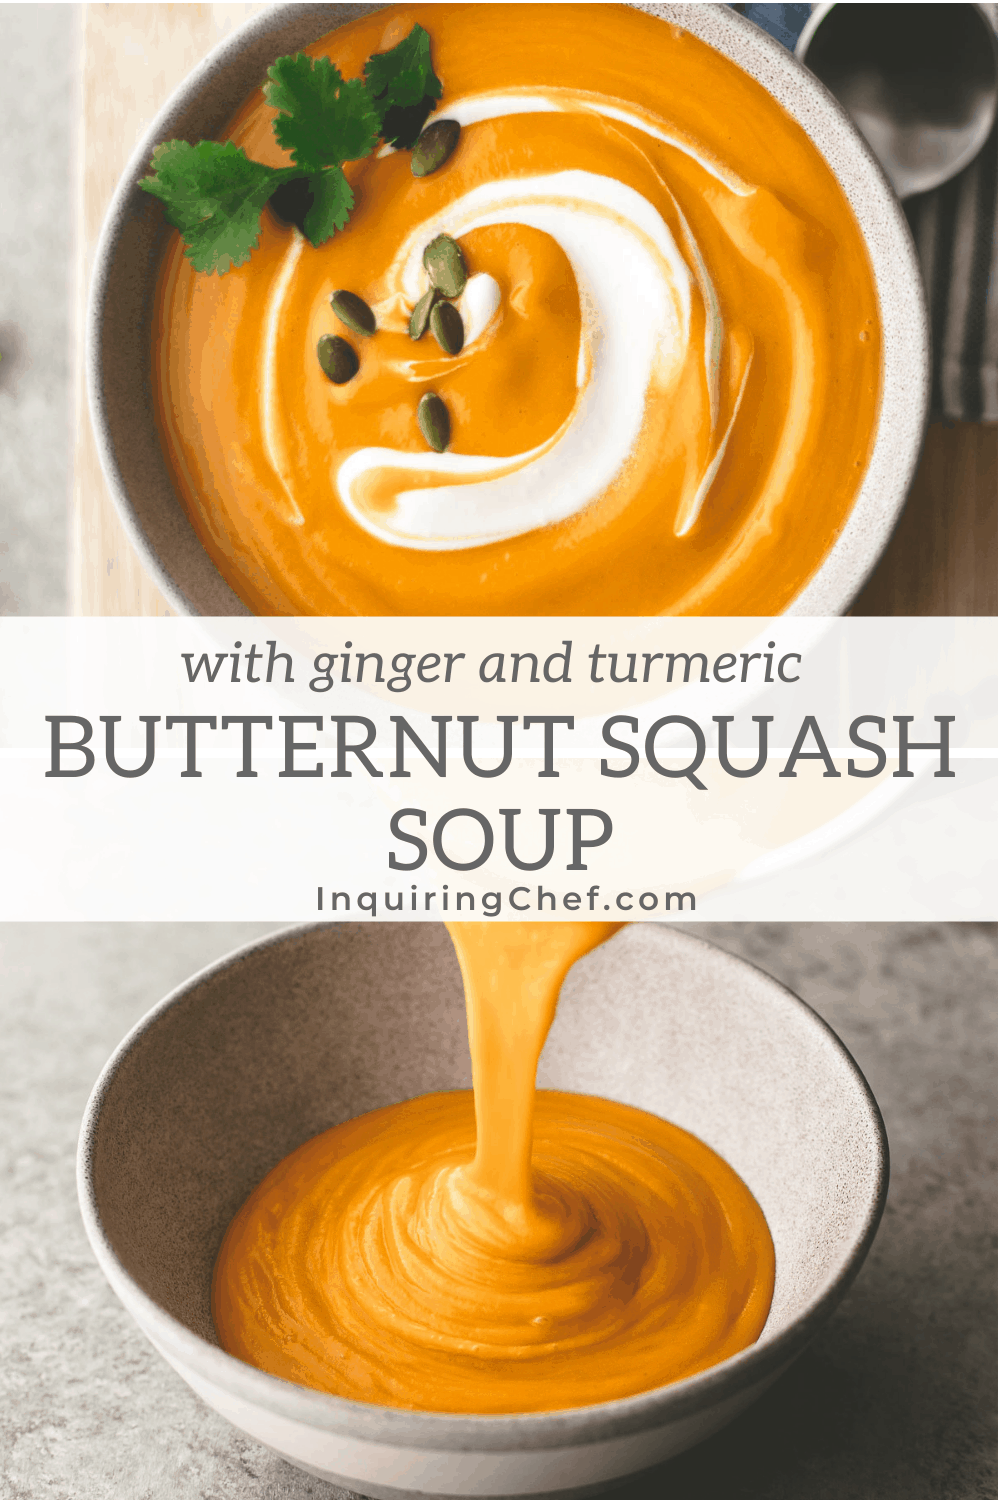 Butternut Squash Soup with Turmeric and Ginger